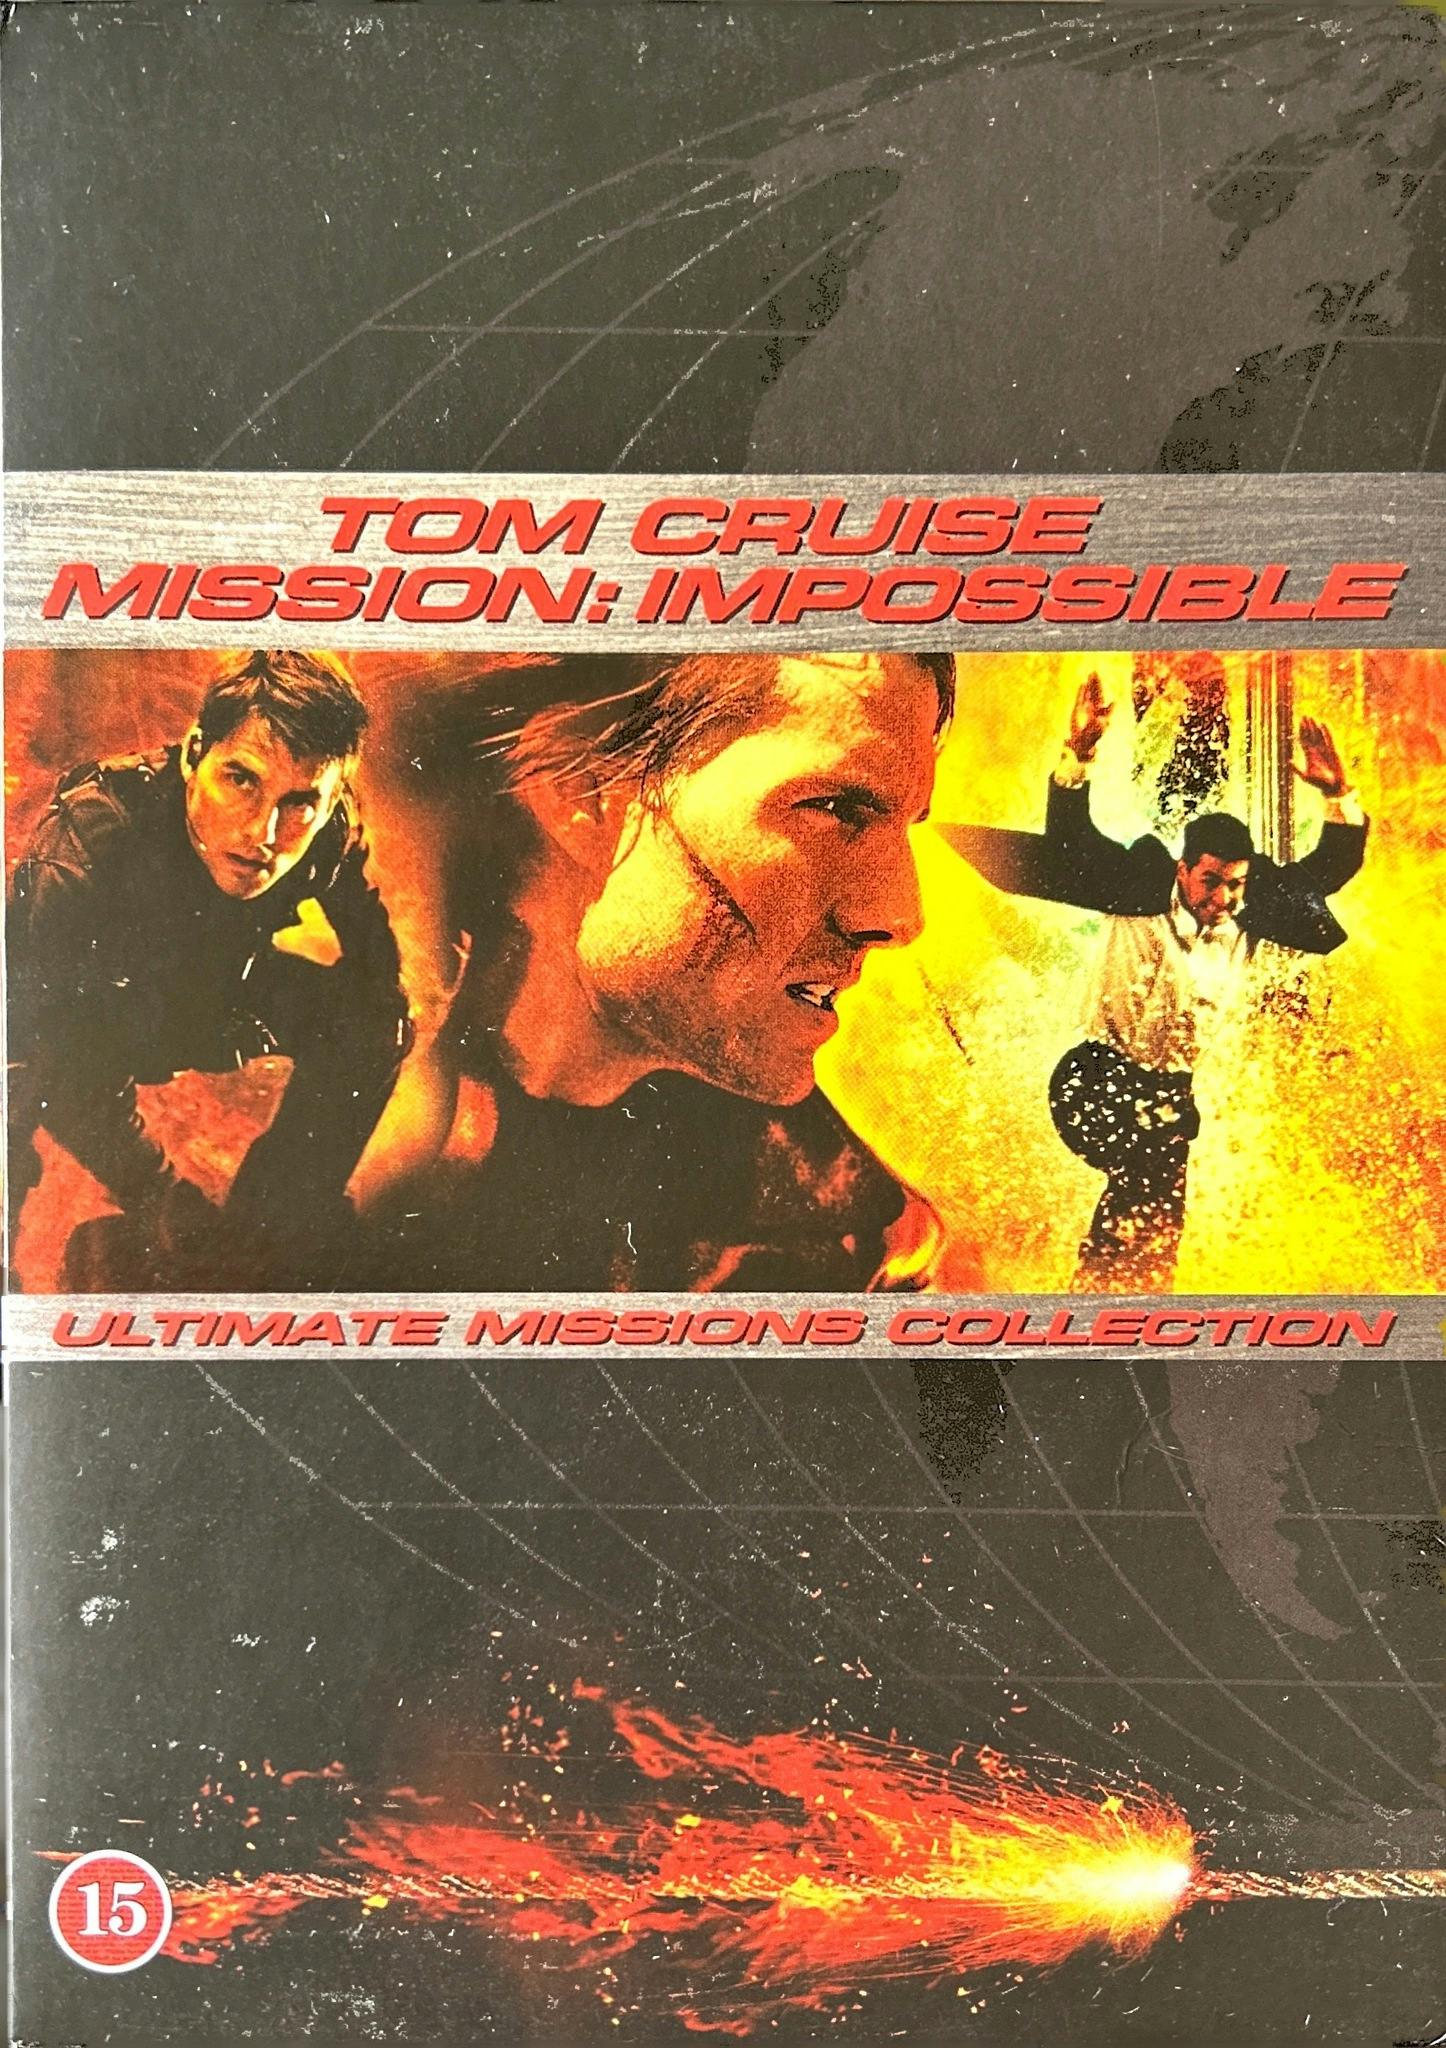 Mission Impossible Trilogy Box (UK Import DVD)